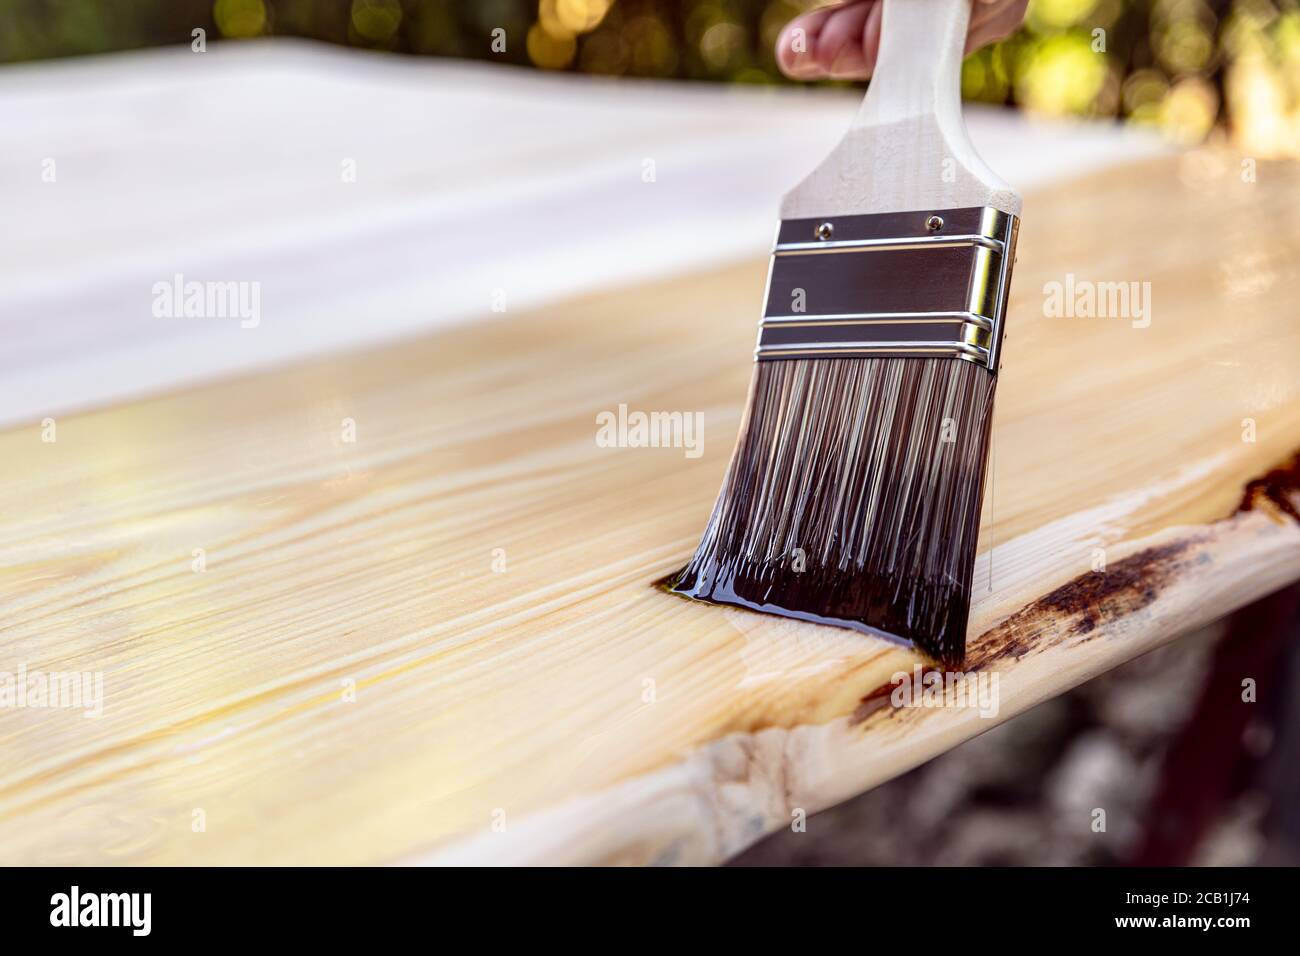 outdoor glazing of a wooden table with a hair brush and oil, concept wood protection Stock Photo